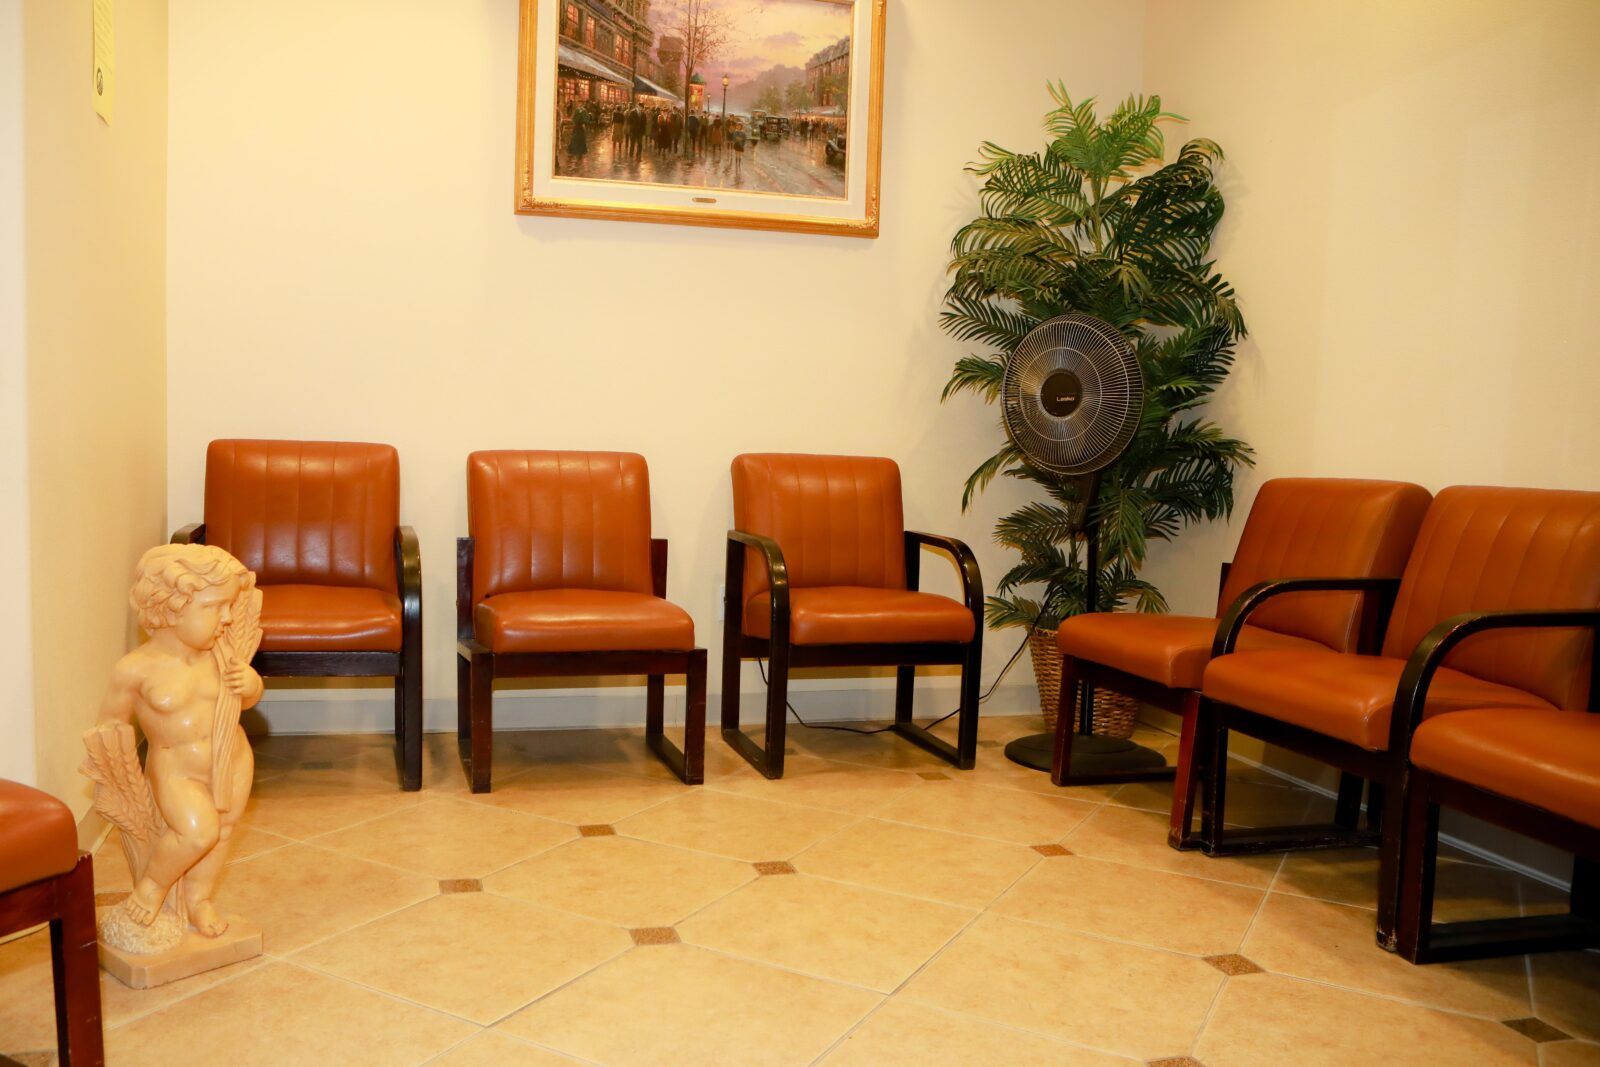 Radiant Medical Group - office Waiting area